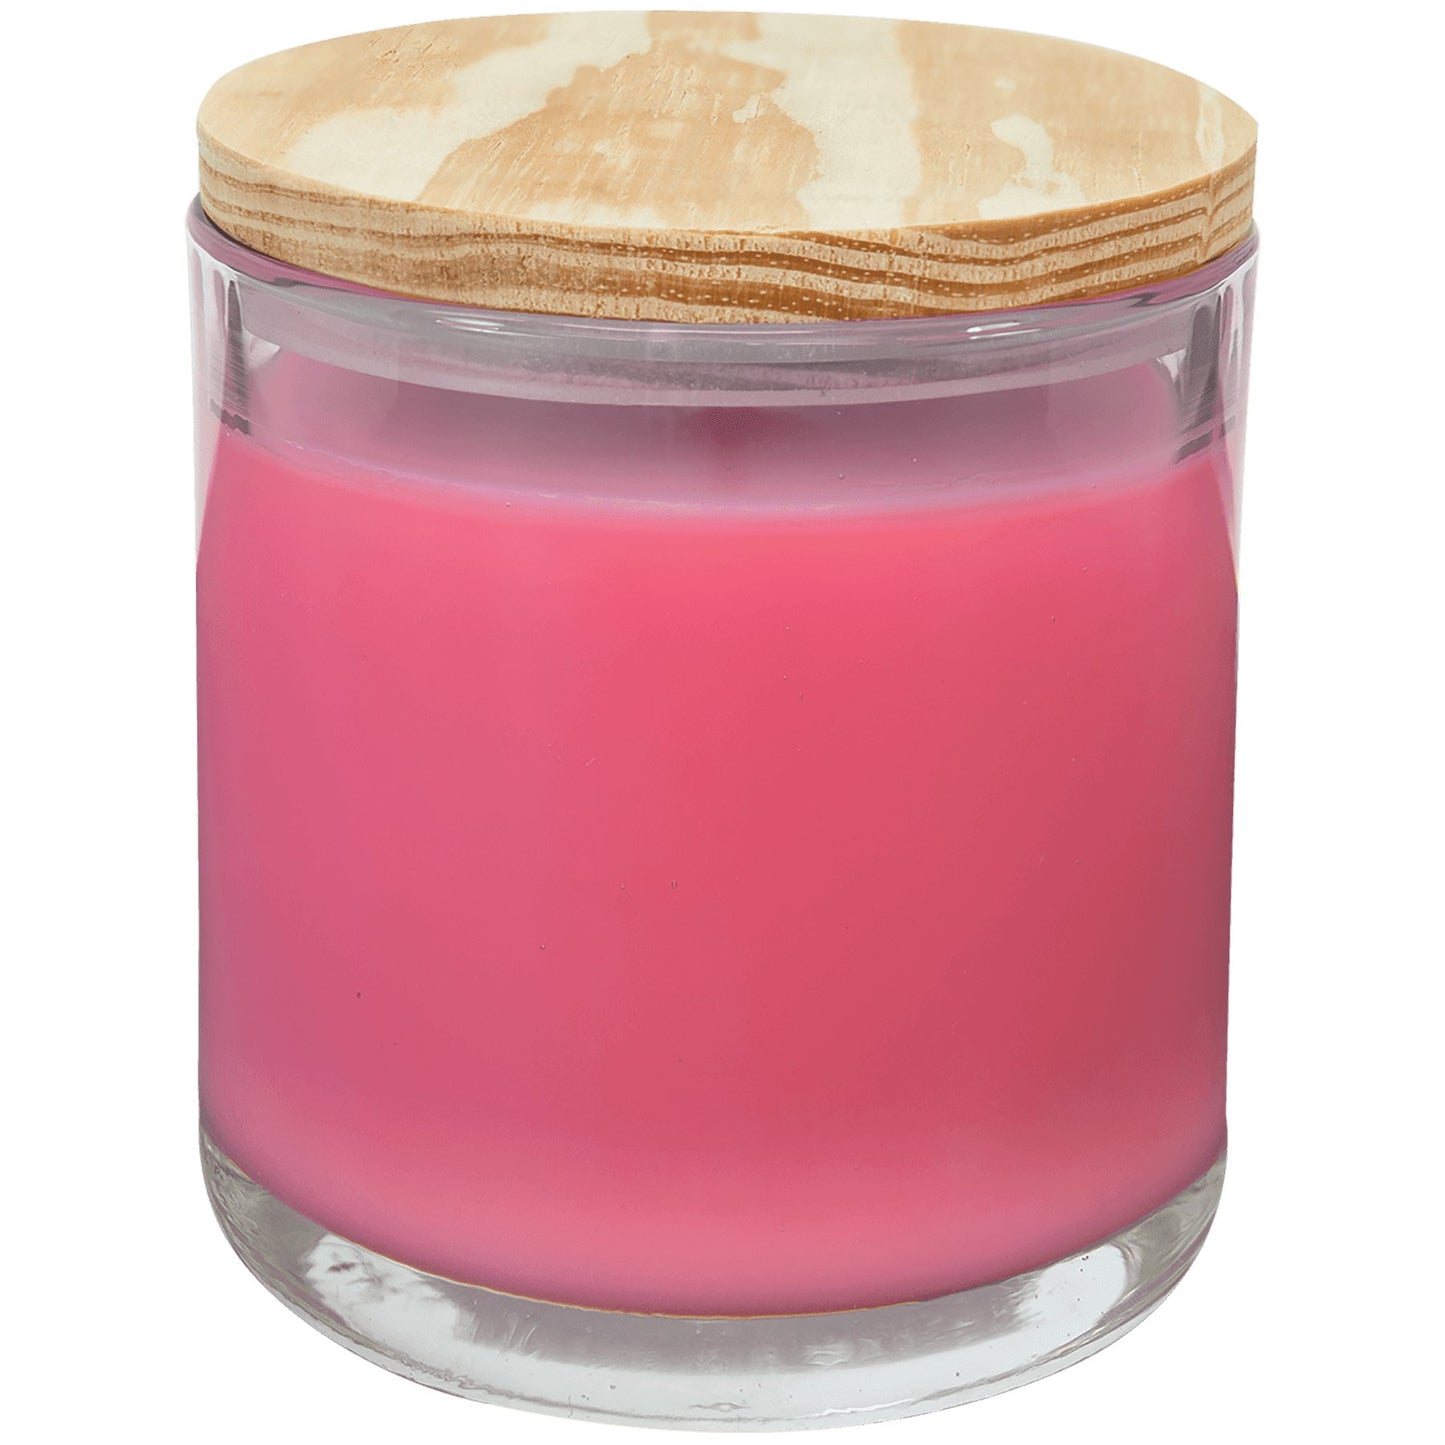 Customizable Scented Candle in a Glass Holder with Wood Lid - Legacy Creator IncPeony Rose